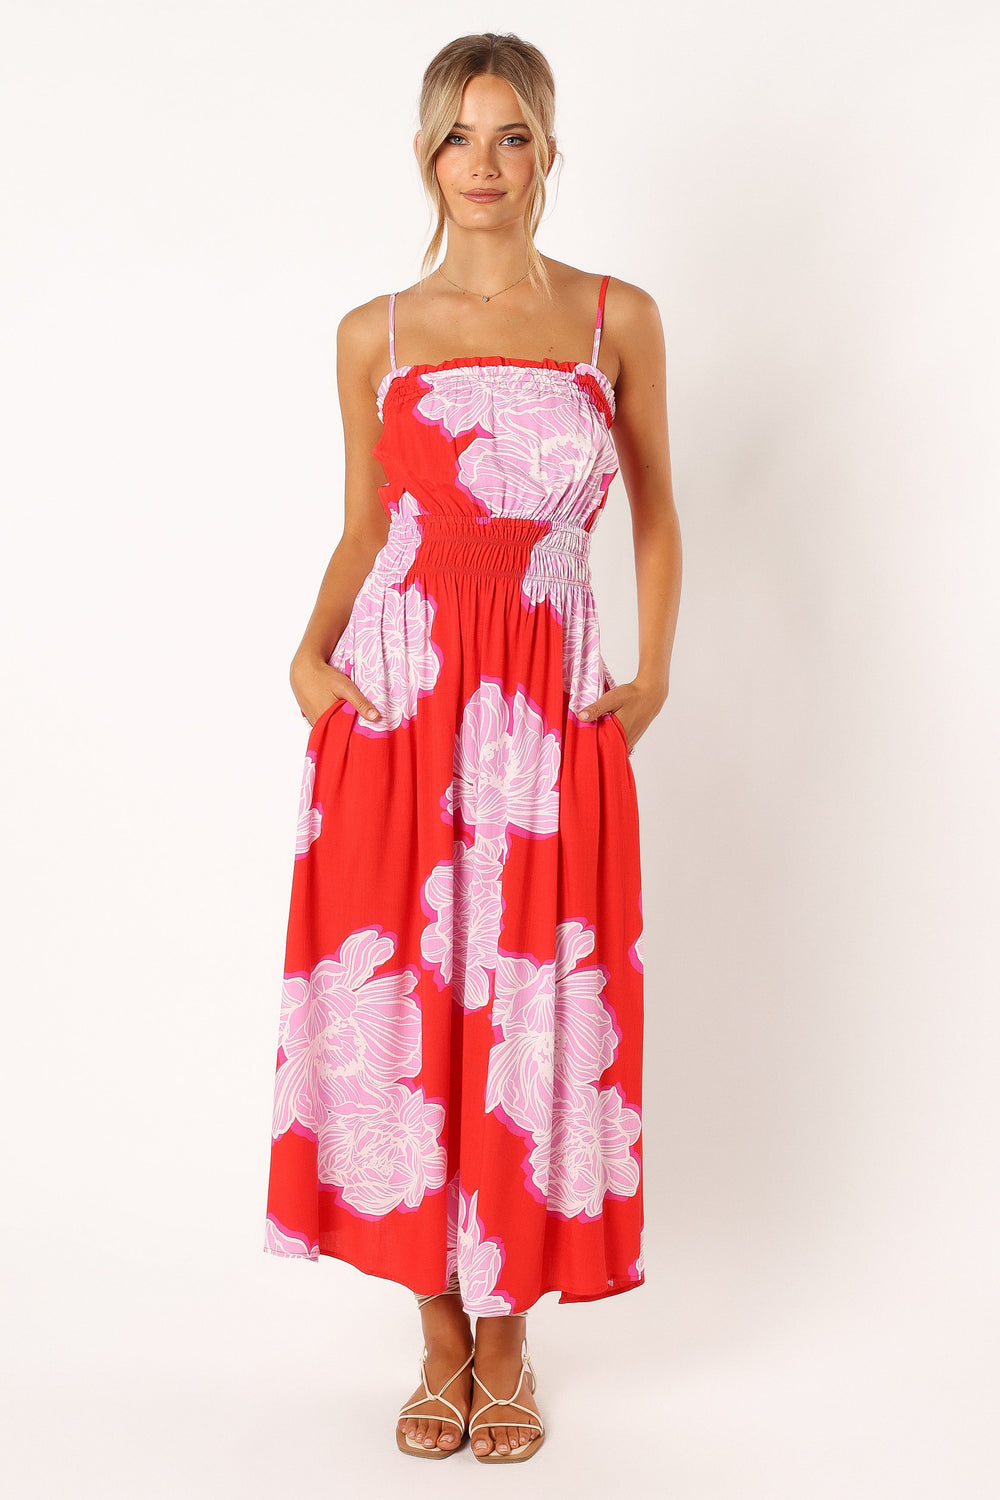 Petal and Pup USA DRESSES Sybel Midi Dress - Red Pink Floral